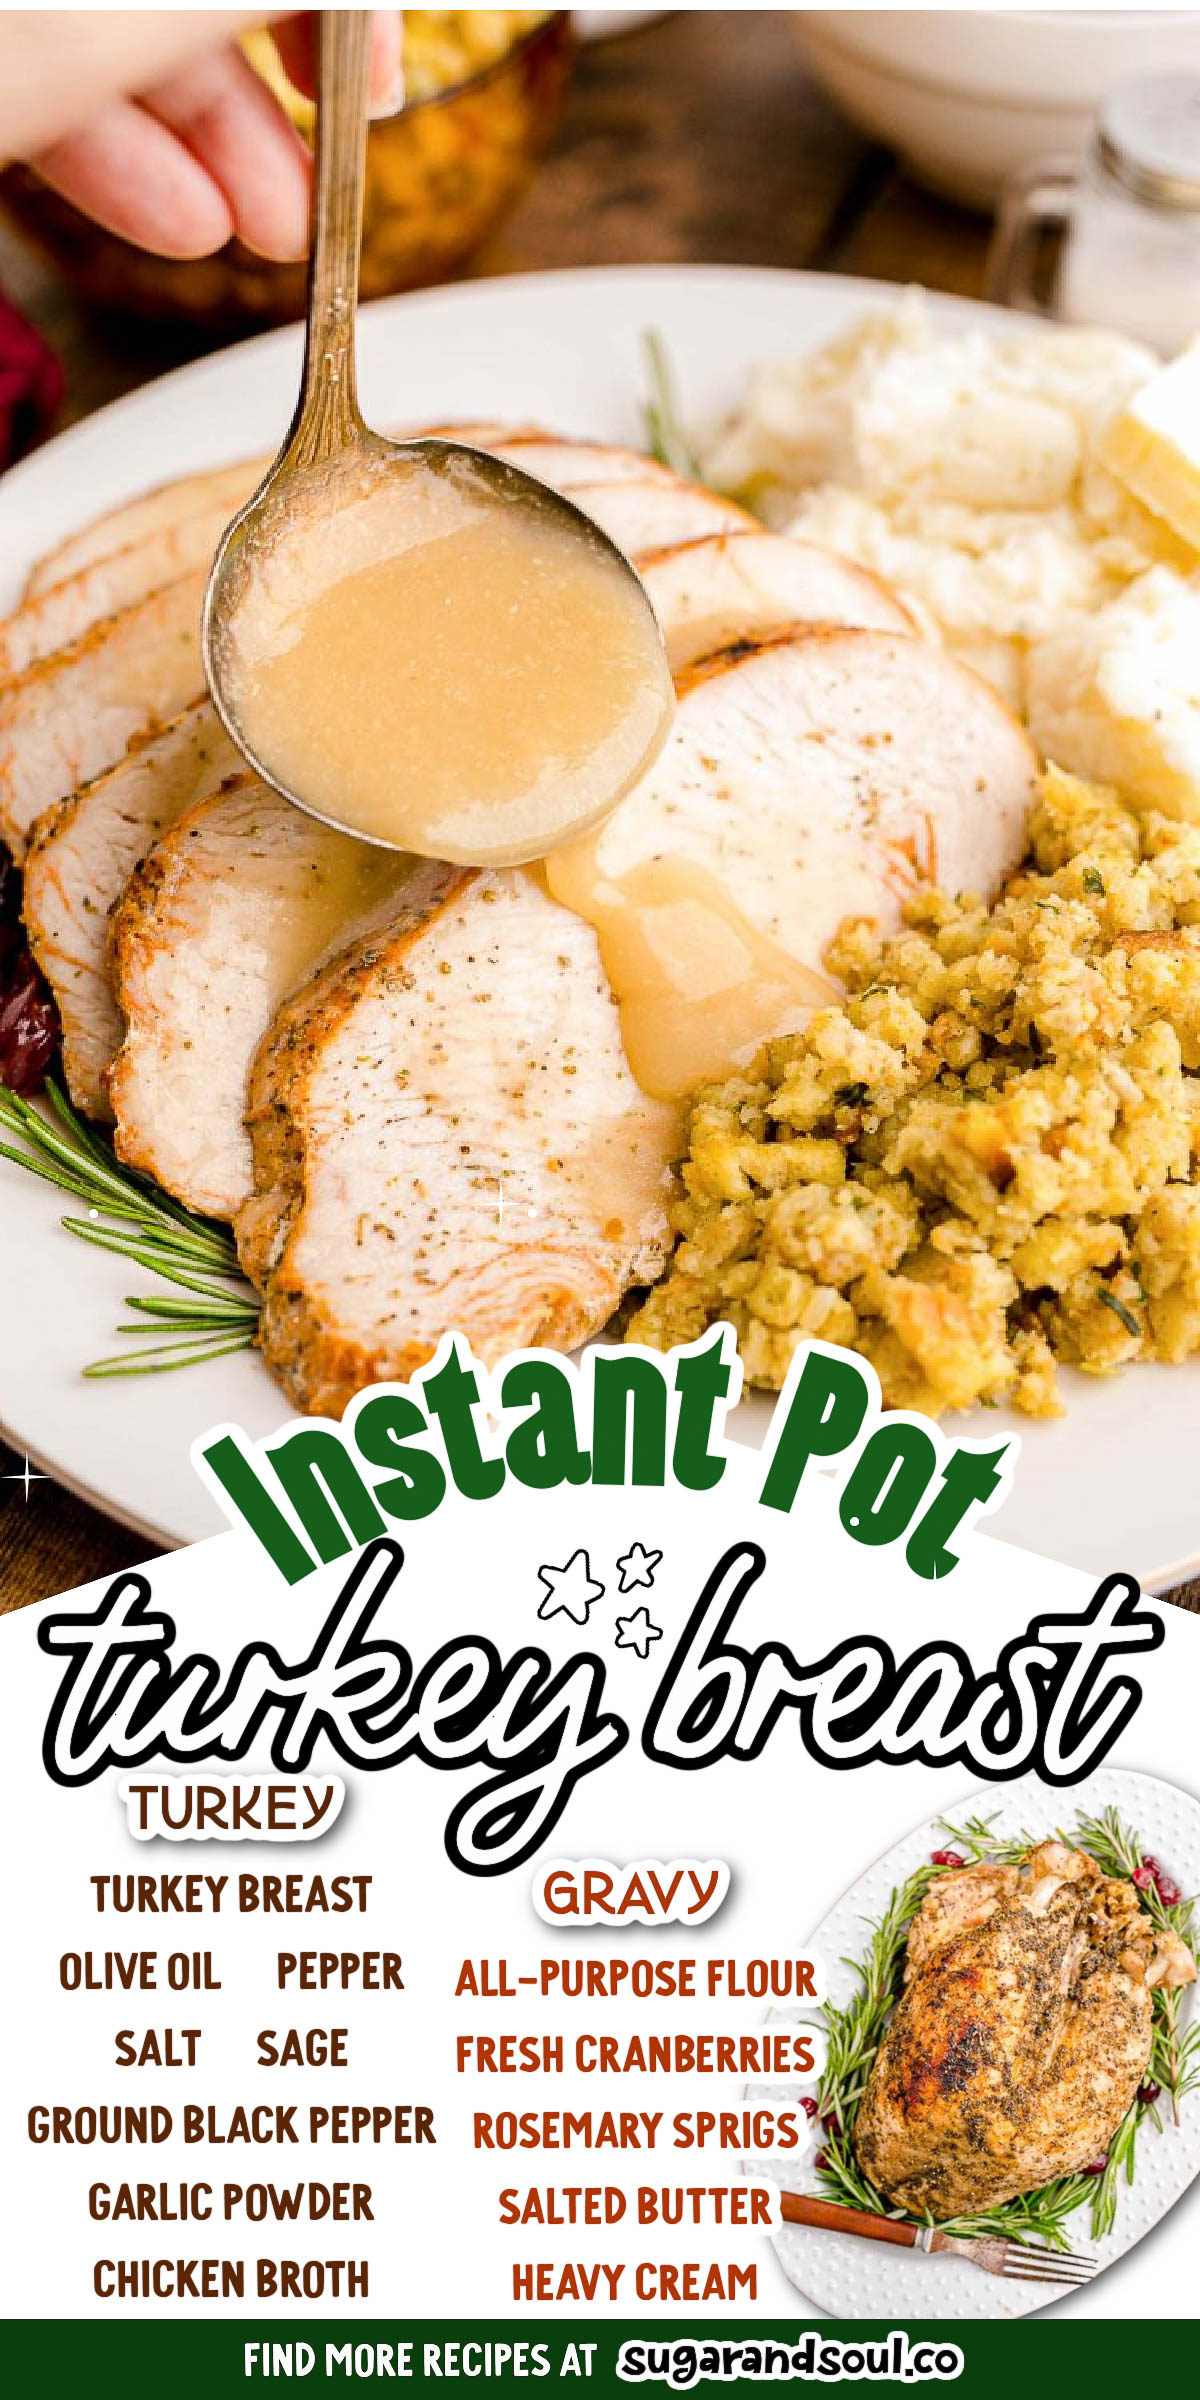 Instant Pot Turkey Breast gets coated in olive oil and a homemade dry seasoning rub before being cooked up to juicy, tender perfection! Cooks in just 45 minutes! via @sugarandsoulco